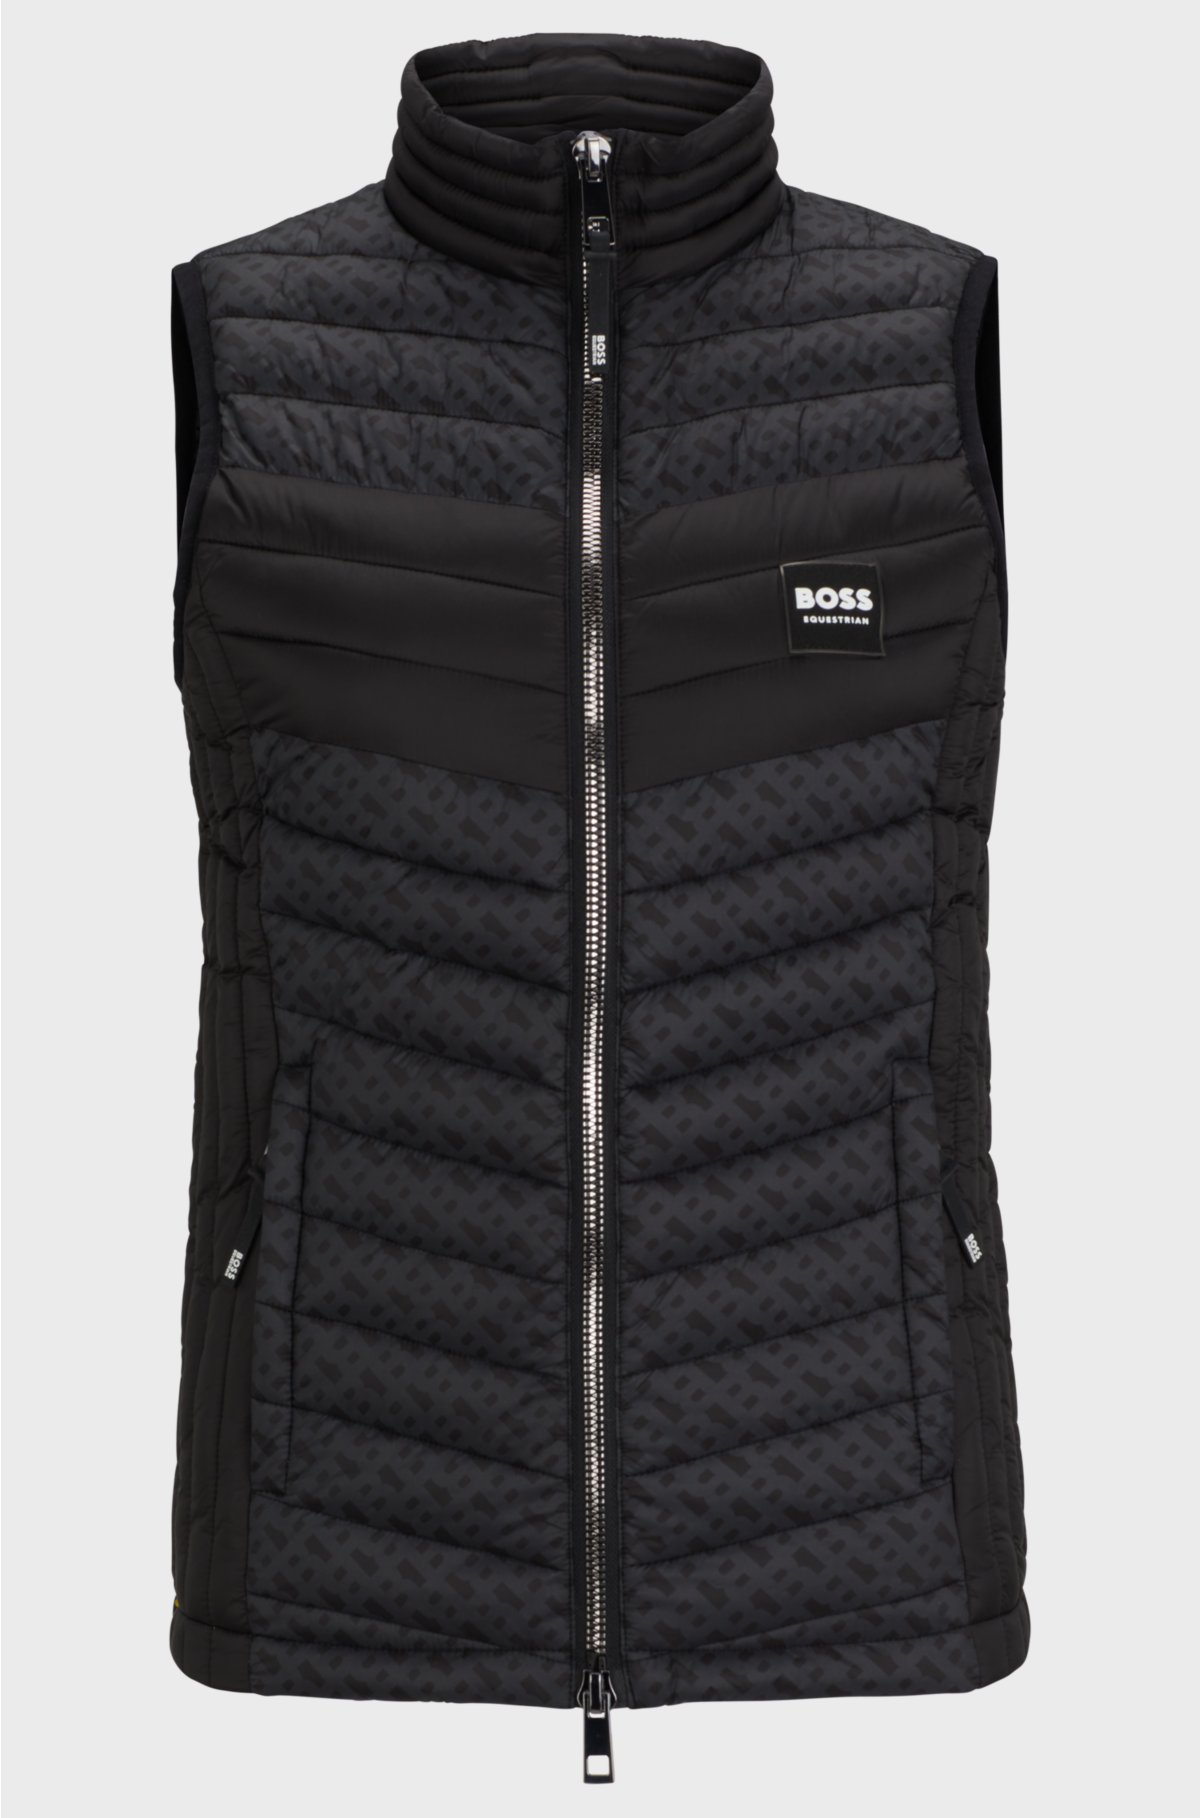 Equestrian monogram gilet with silicone logo patches, Black